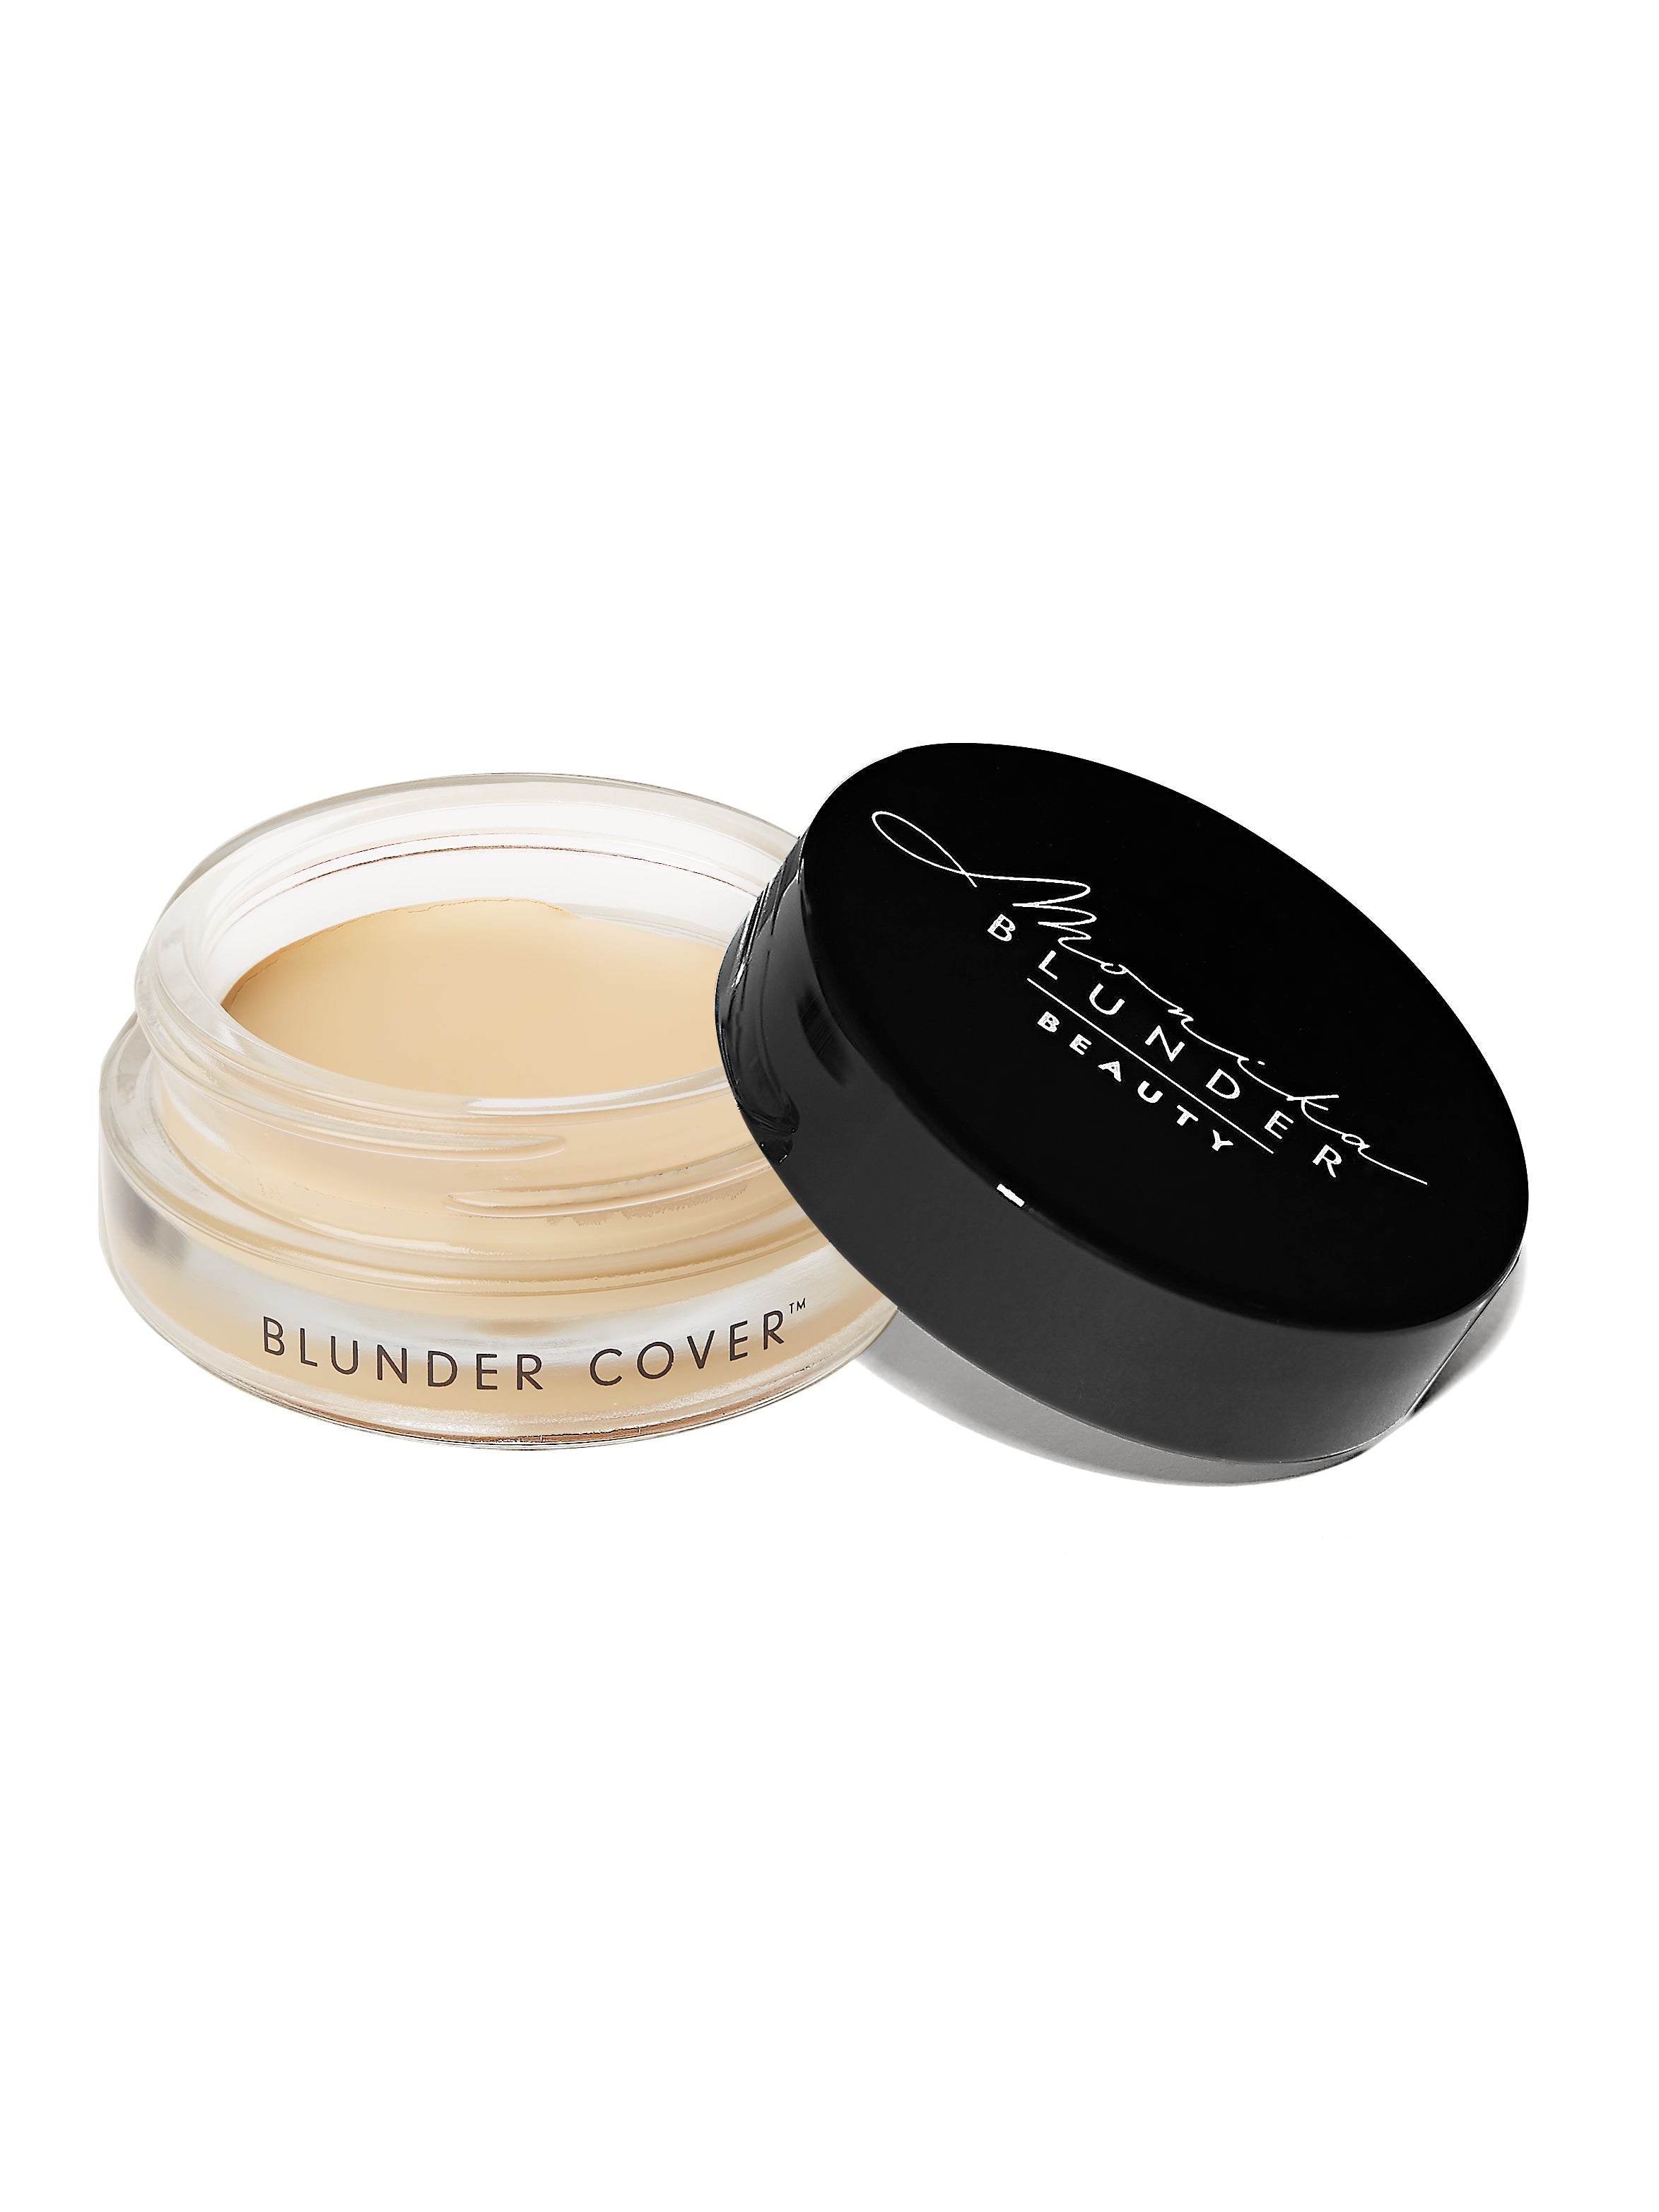 Blunder Cover an All-In-One Foundation/Concealer Shade - Eins.5 - 0